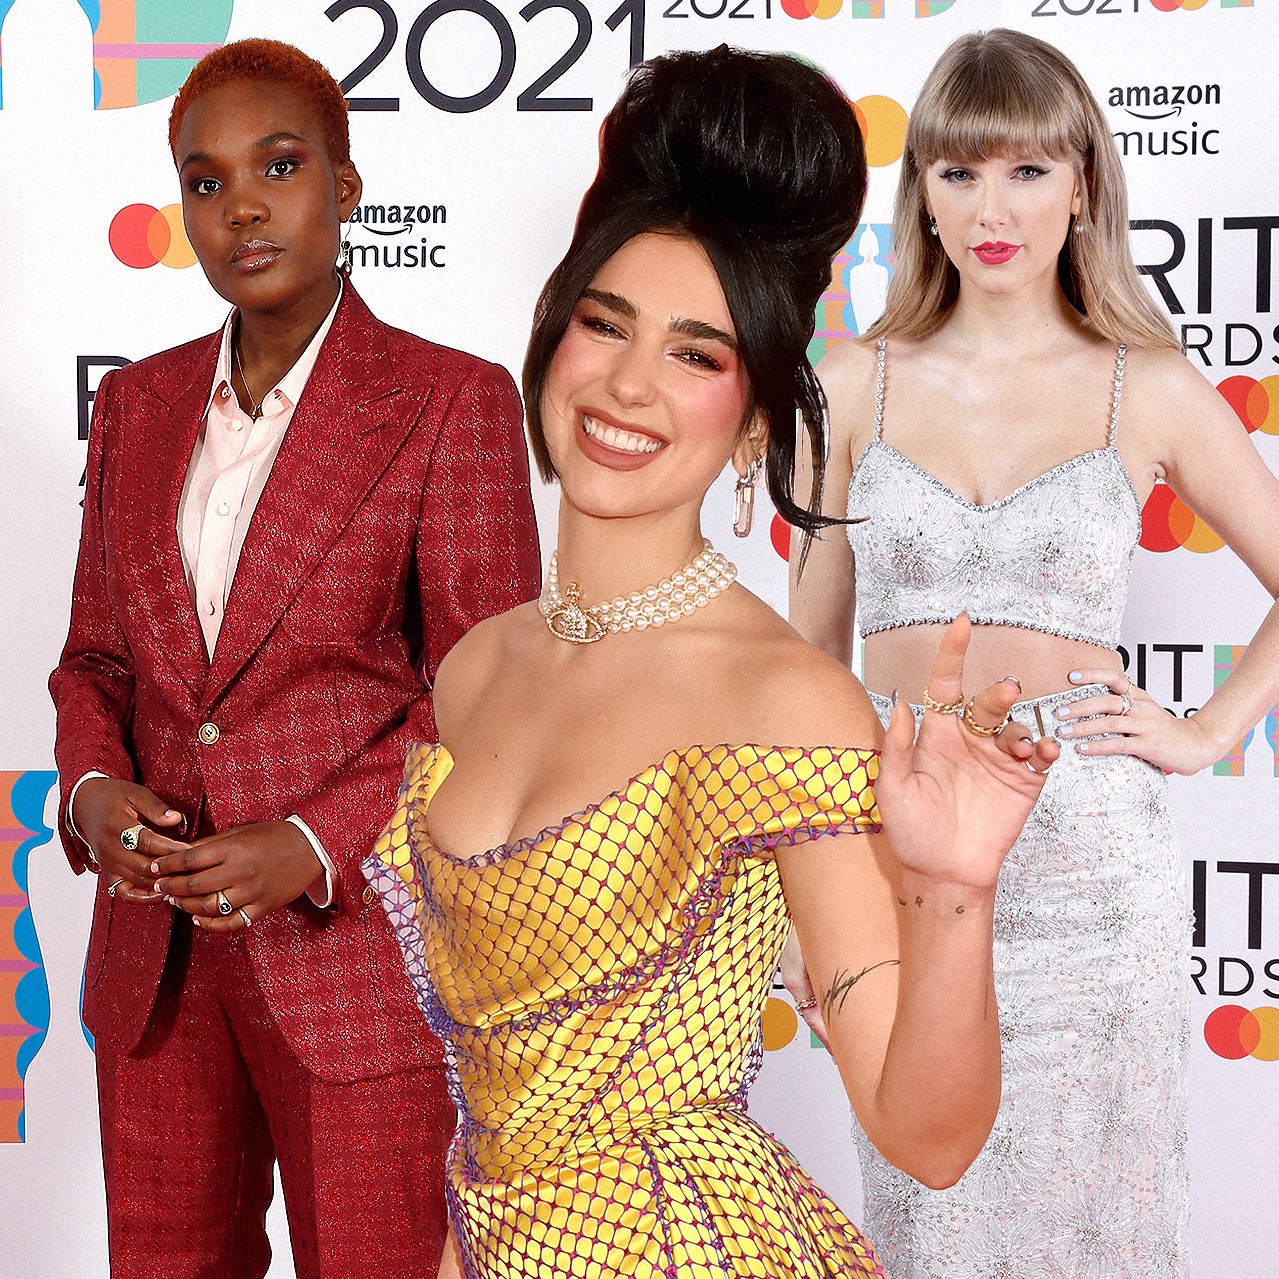 Girl Power! Finally, Women Dominated At The Brits